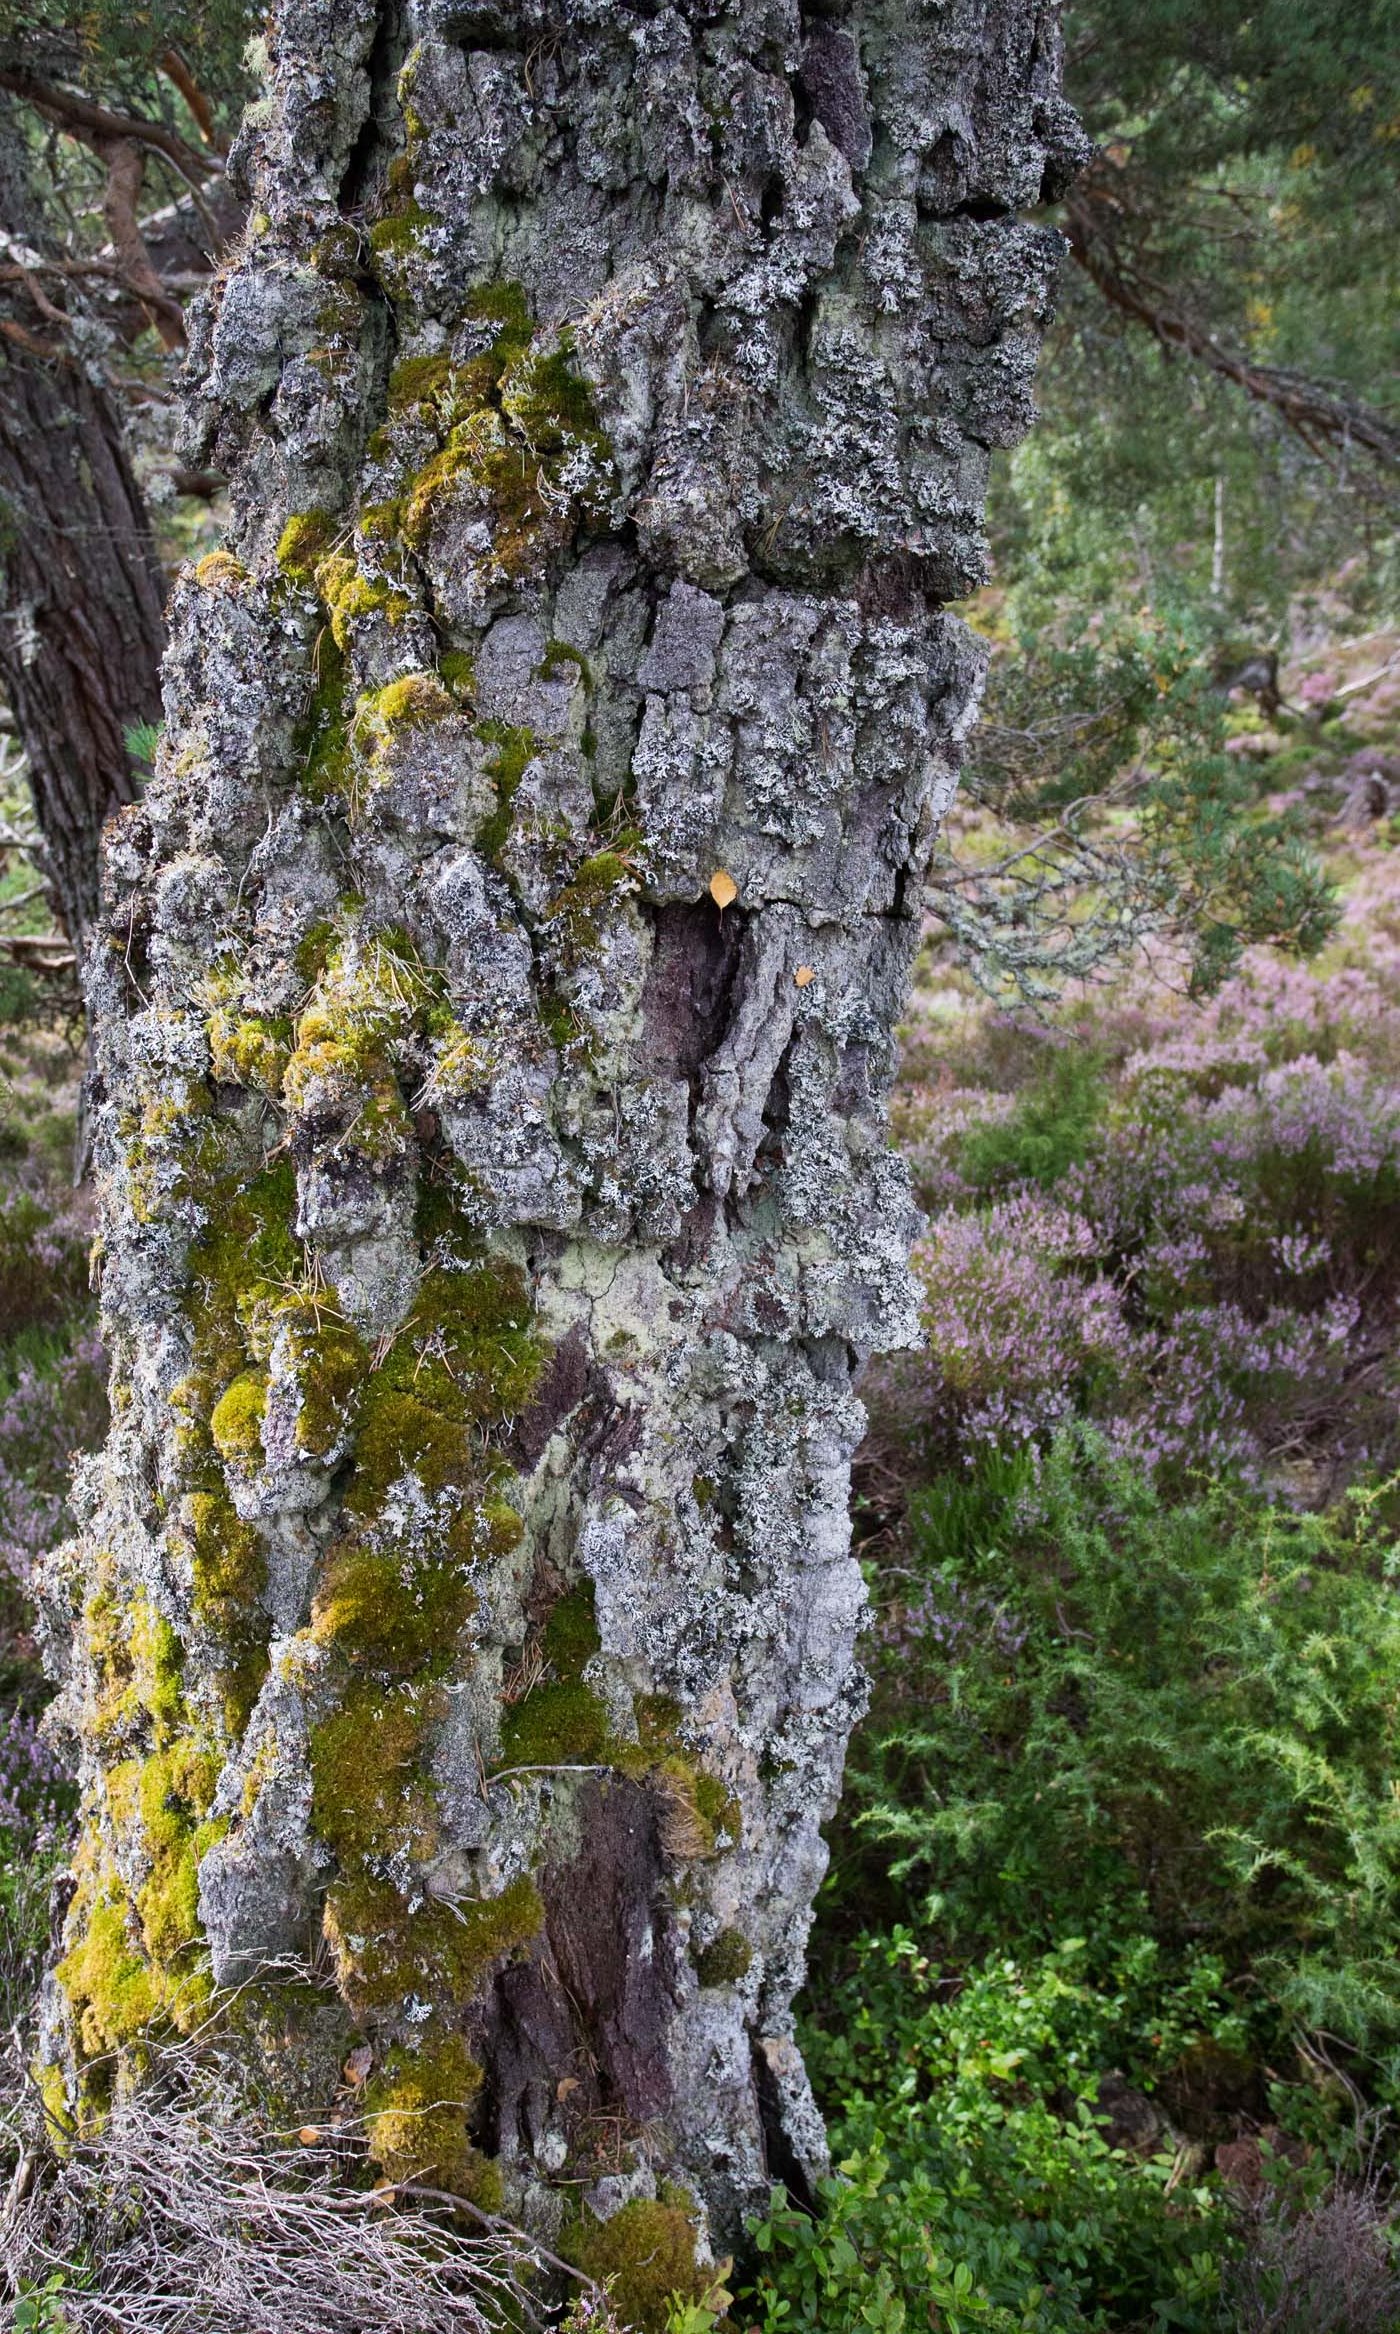 This ancient birch has been colonised by mosses and lichens. Photo: Duncan Le May